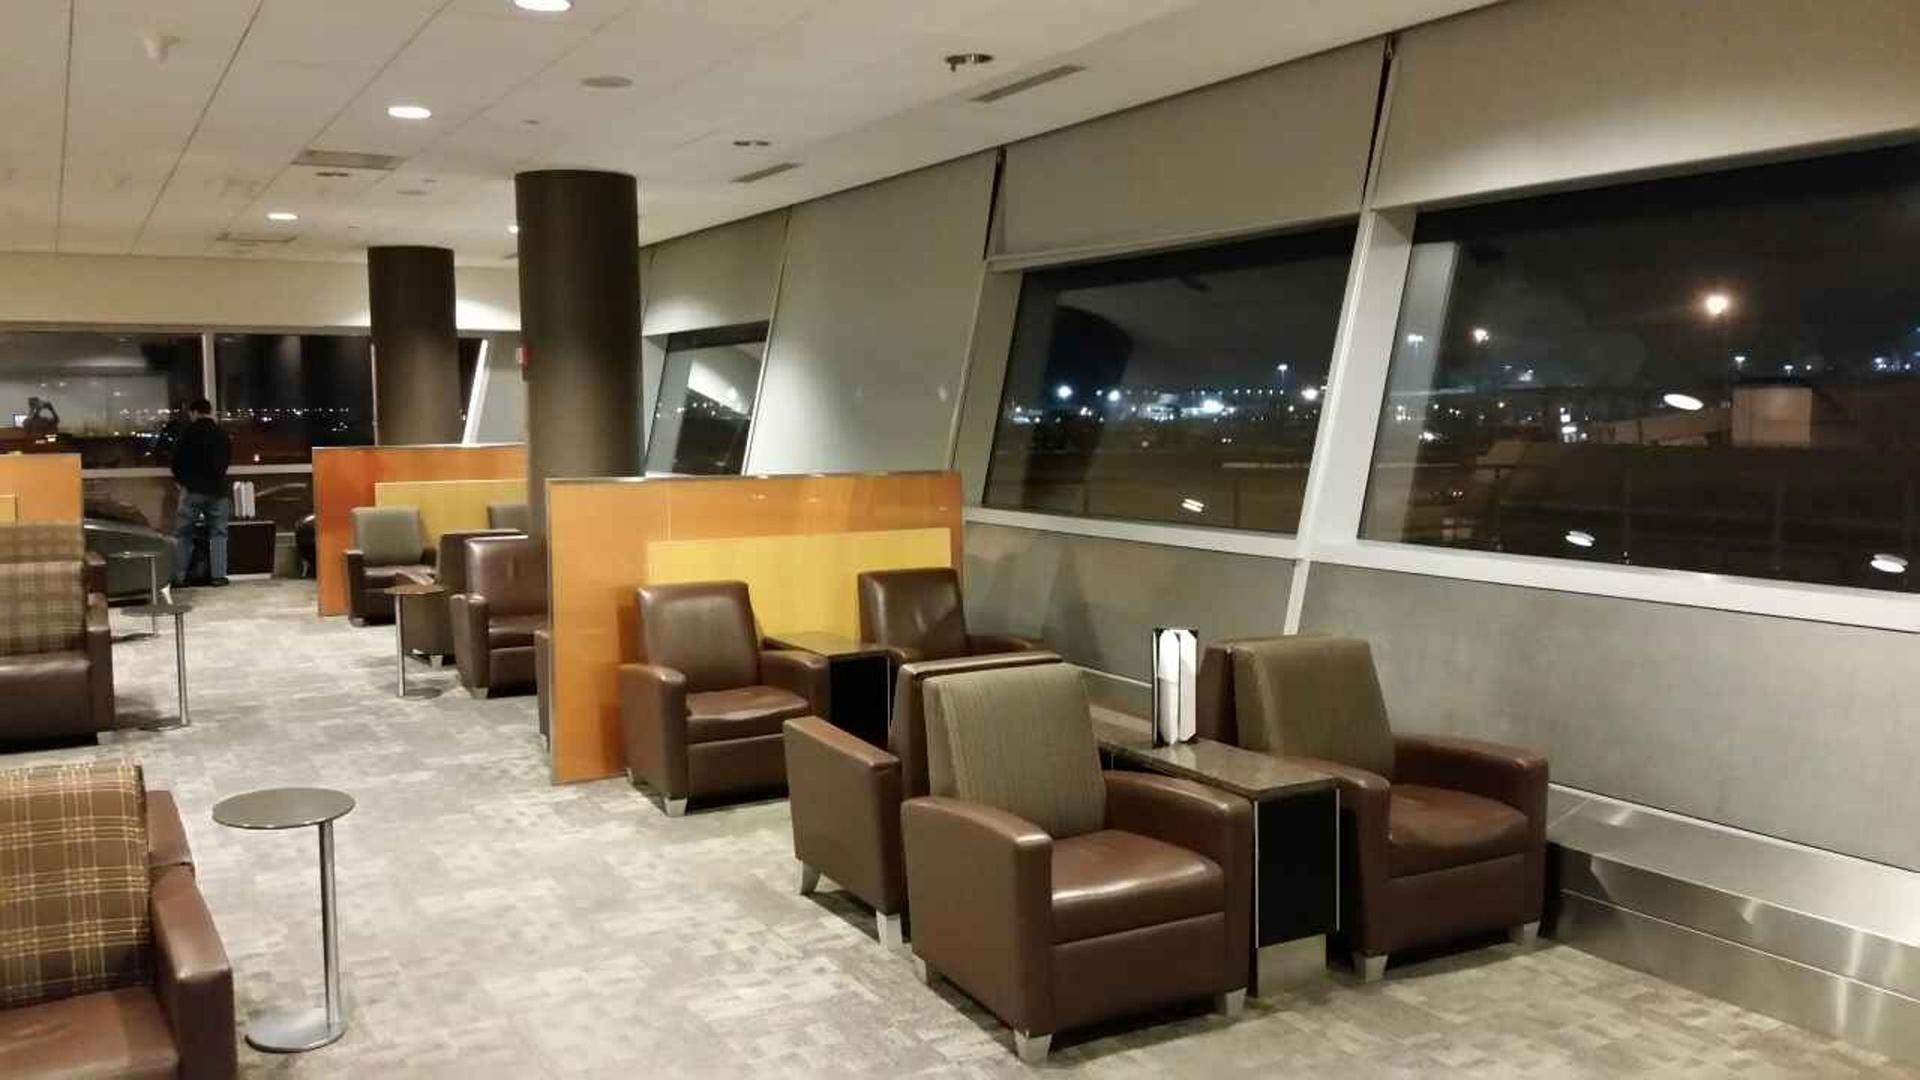 American Airlines Admirals Club image 10 of 25